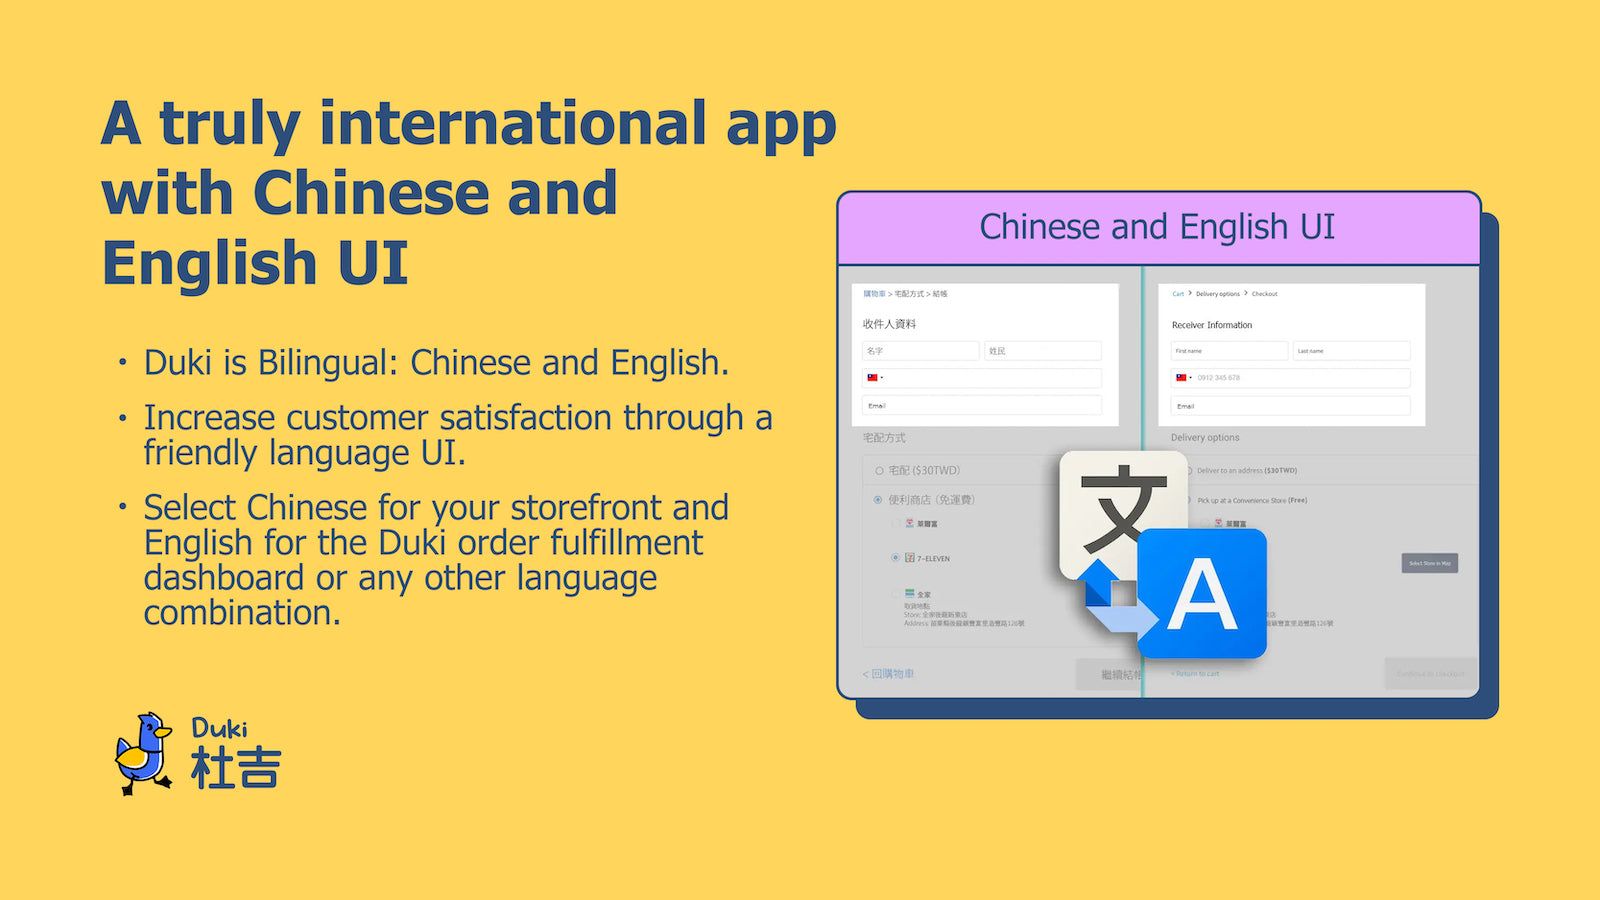 A truly international app with Chinese and English UI.